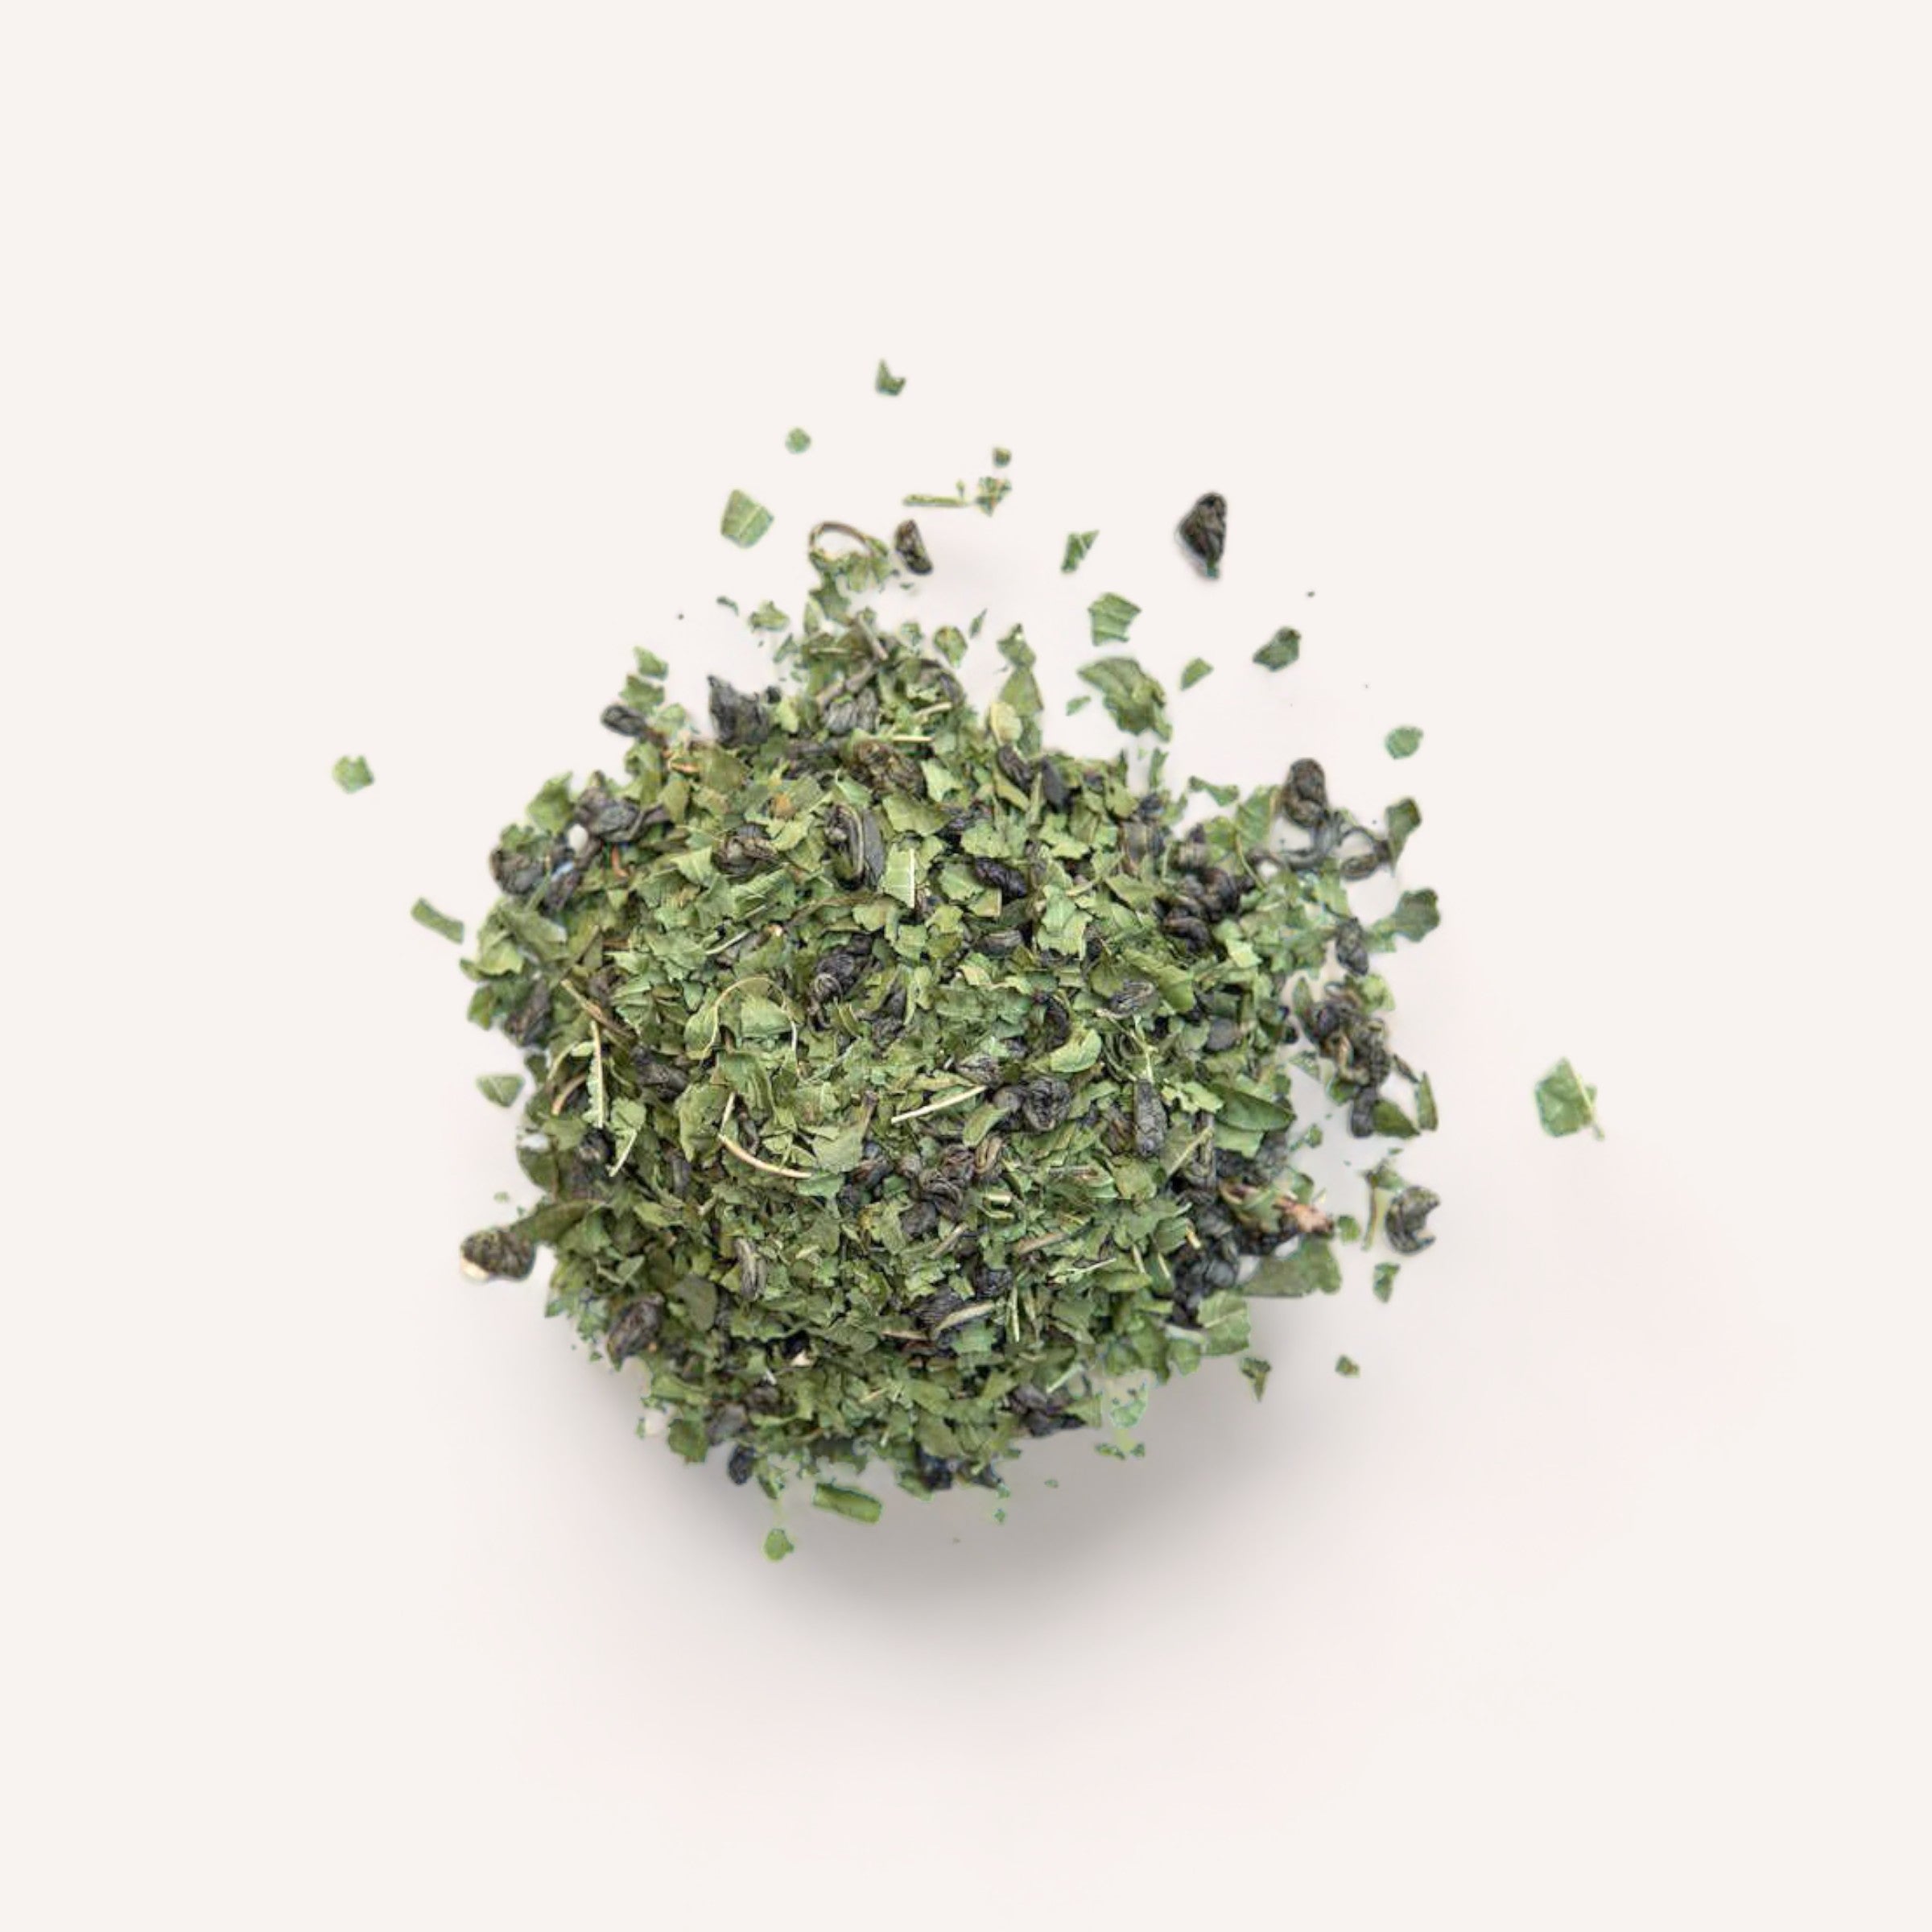 A neat pile of dried Revive Tea herbs by Forage + Bloom, rich in antioxidants and known to stimulate metabolism, isolated on a white background.